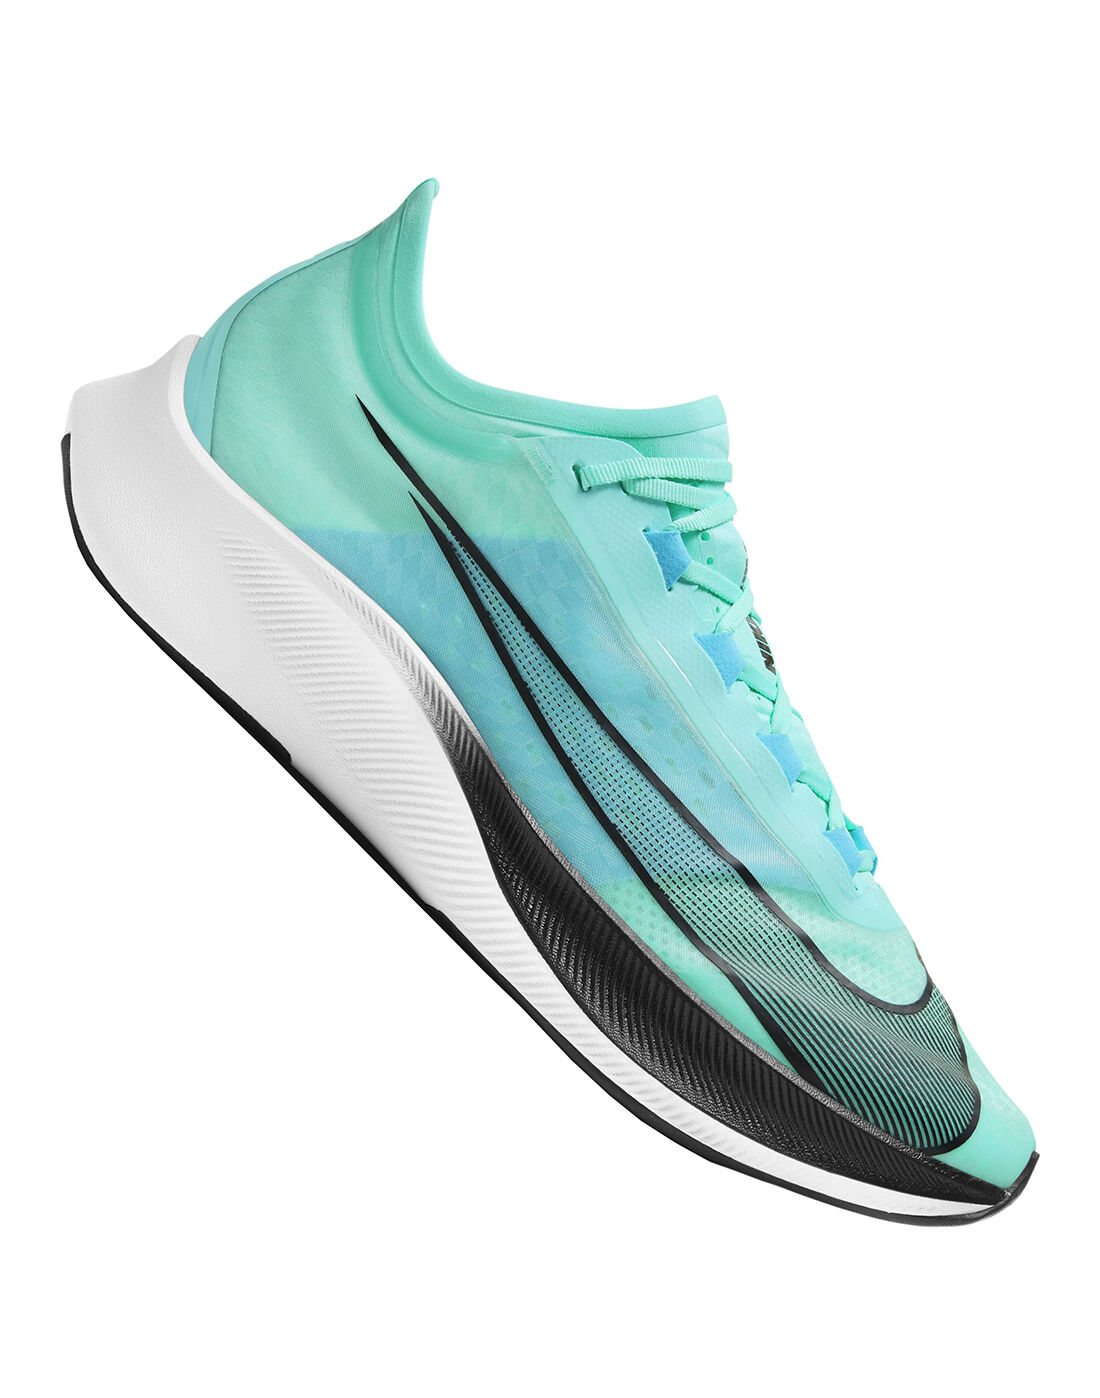 nike zoom fly 3 colors